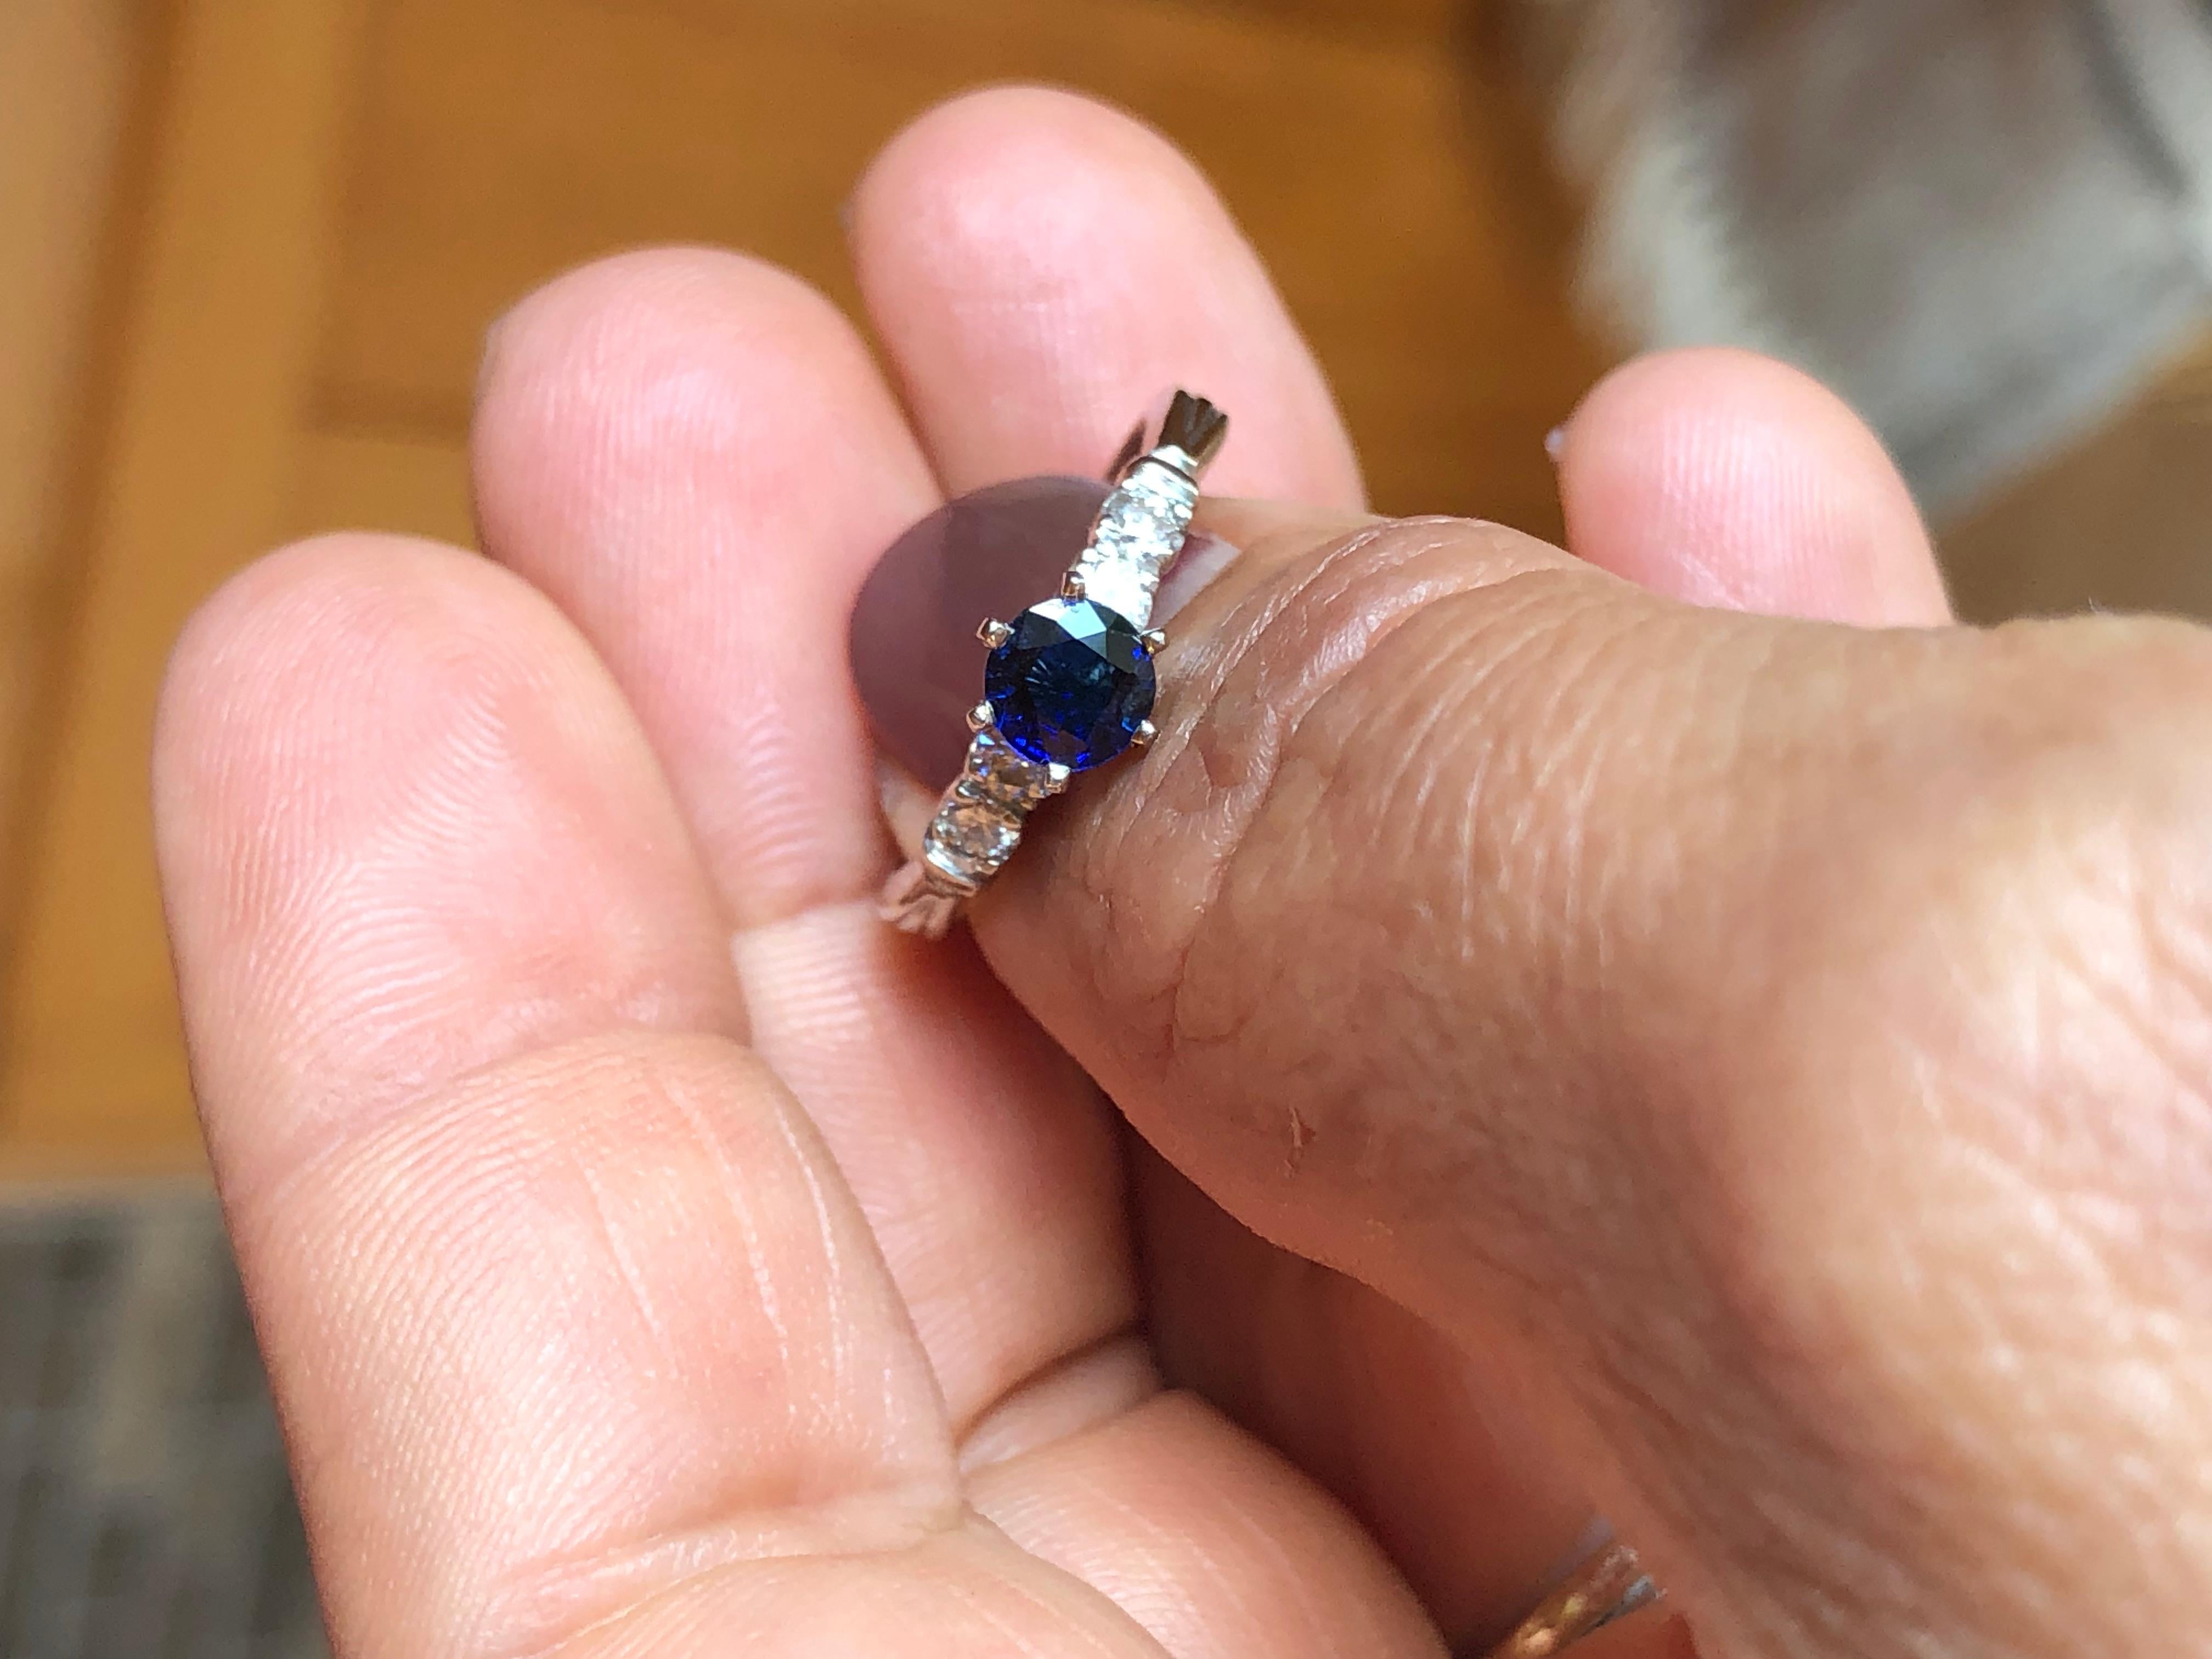 This is a lovely vintage 1 carat royal blue sapphire and diamond 14K white gold engagement ring. It has a great design and holds Approx. 0.65 carat, royal blue sapphire round cut in the center and four round brilliant cut diamonds G-H/SI1, totaling